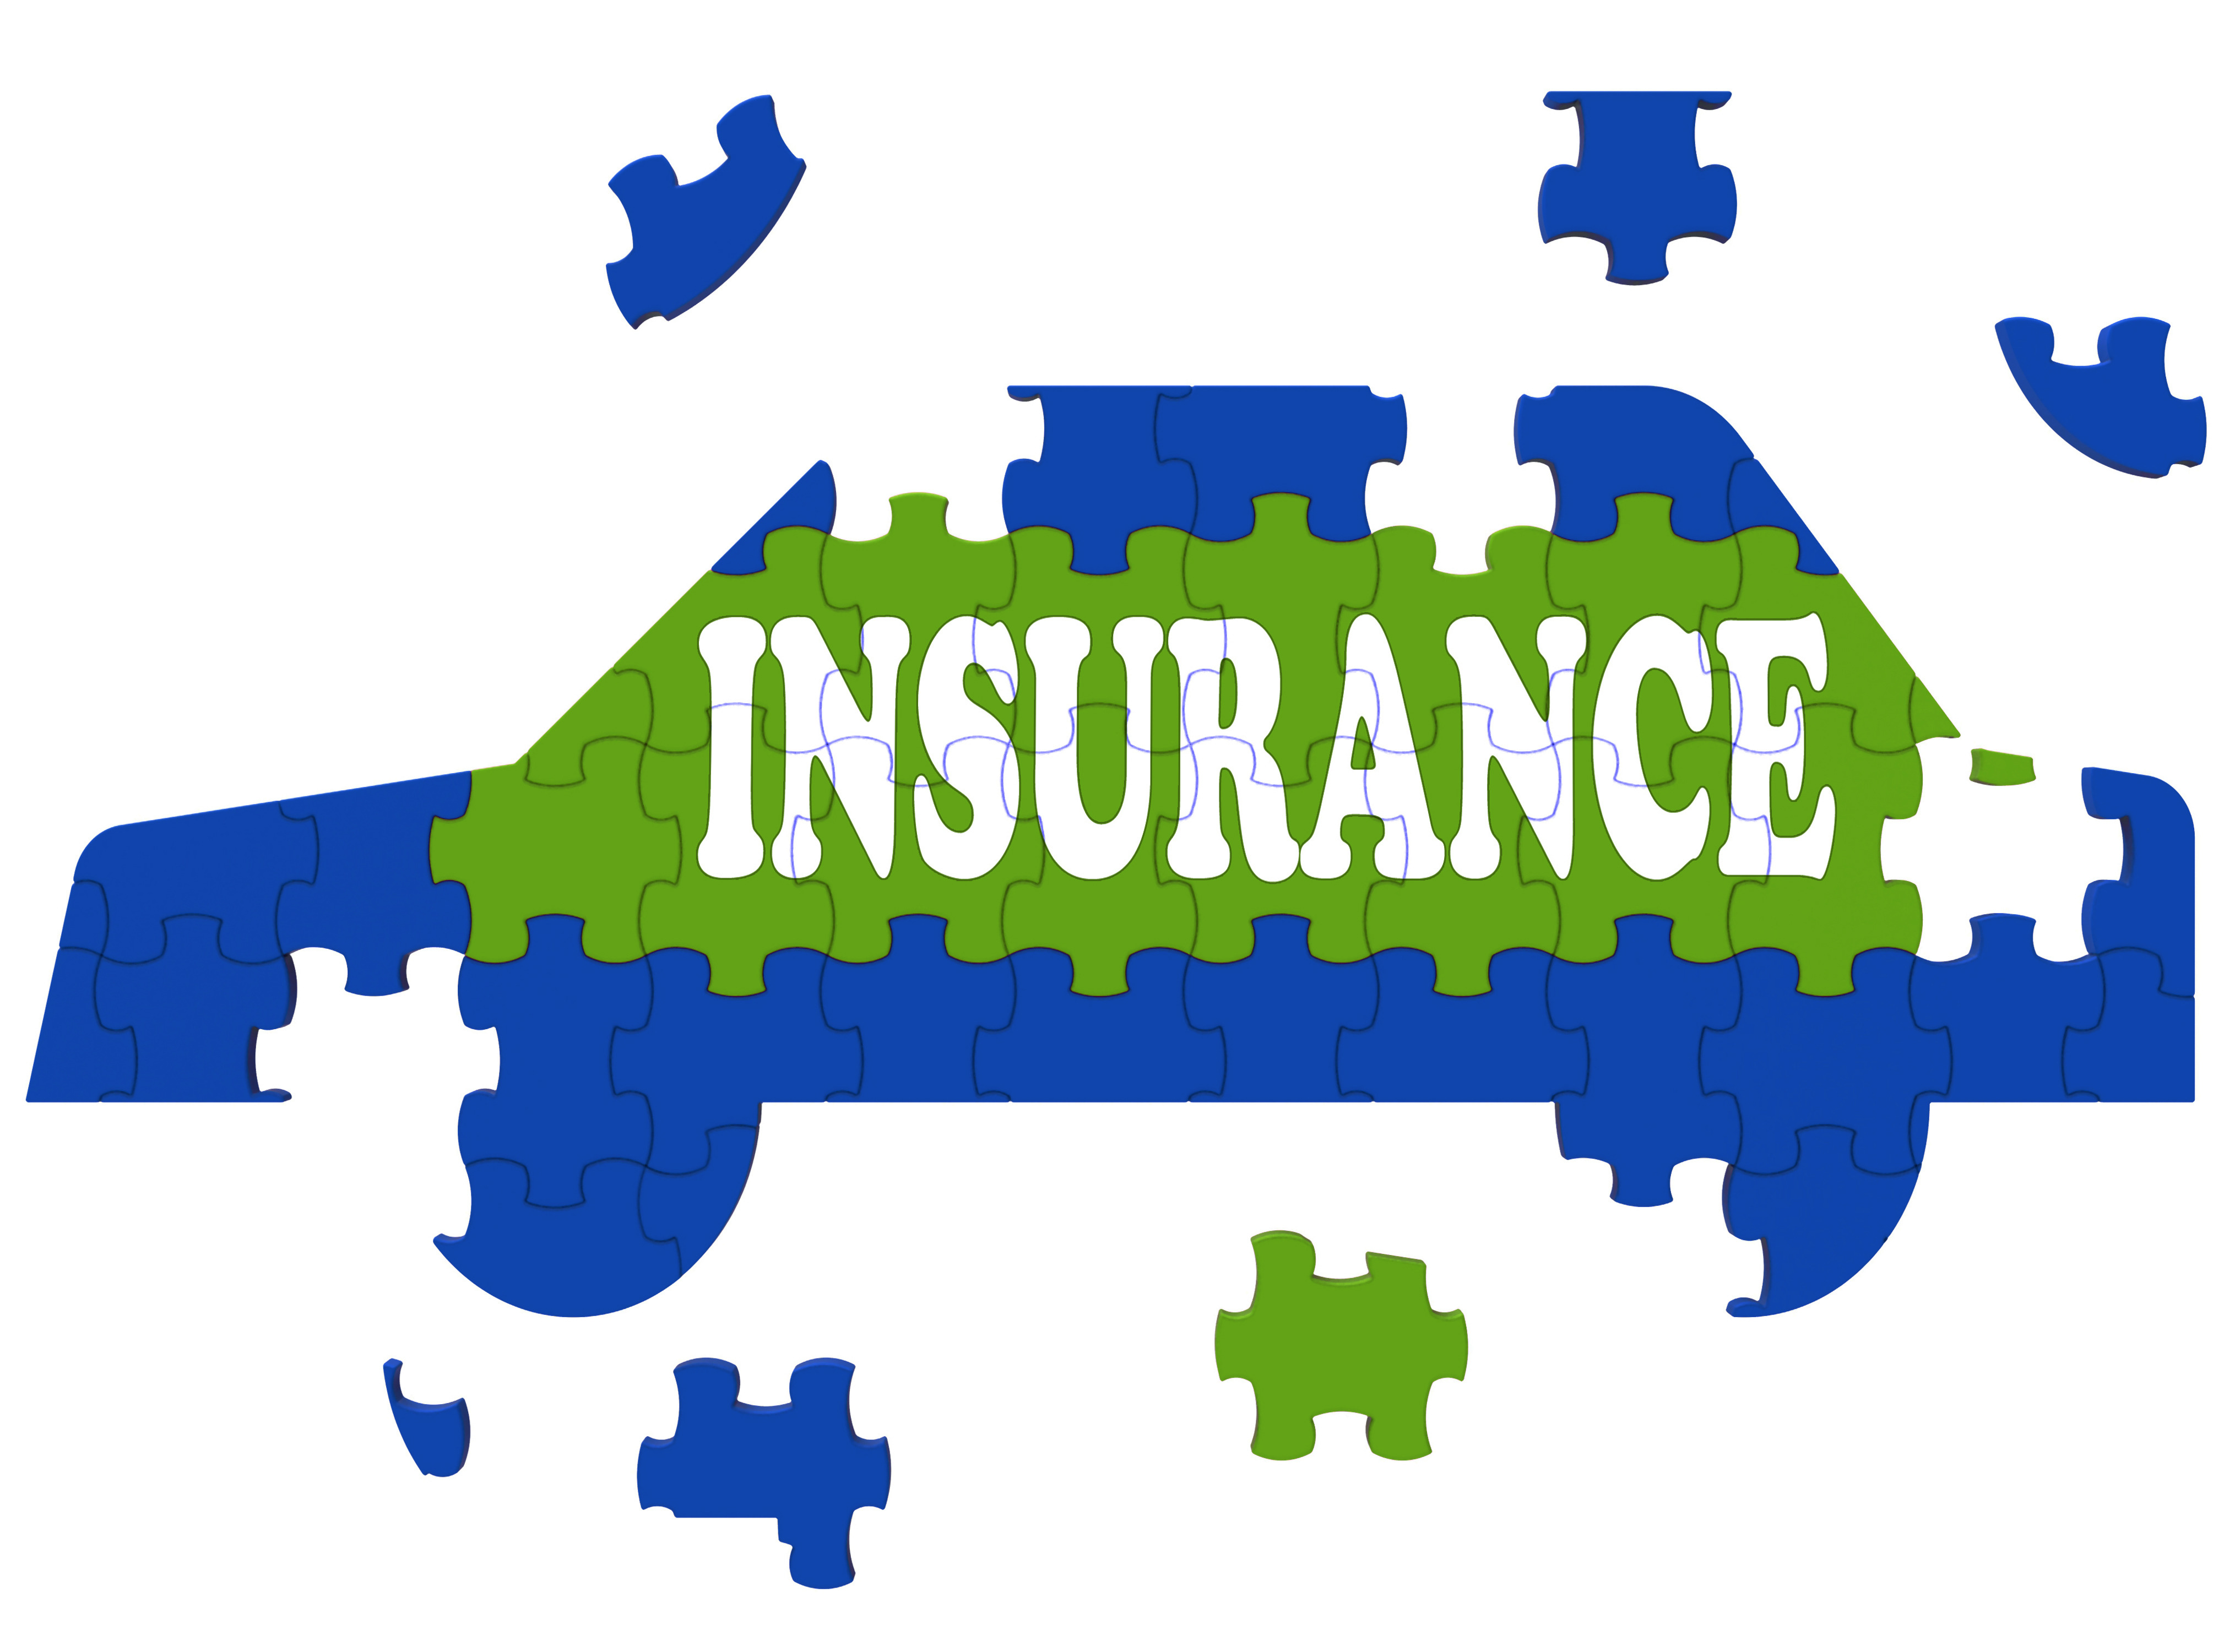 The-Cheapest-Car-Insurance-Quote-Isnt-Always-the-Best-Option-Avante-Insurance.jpg